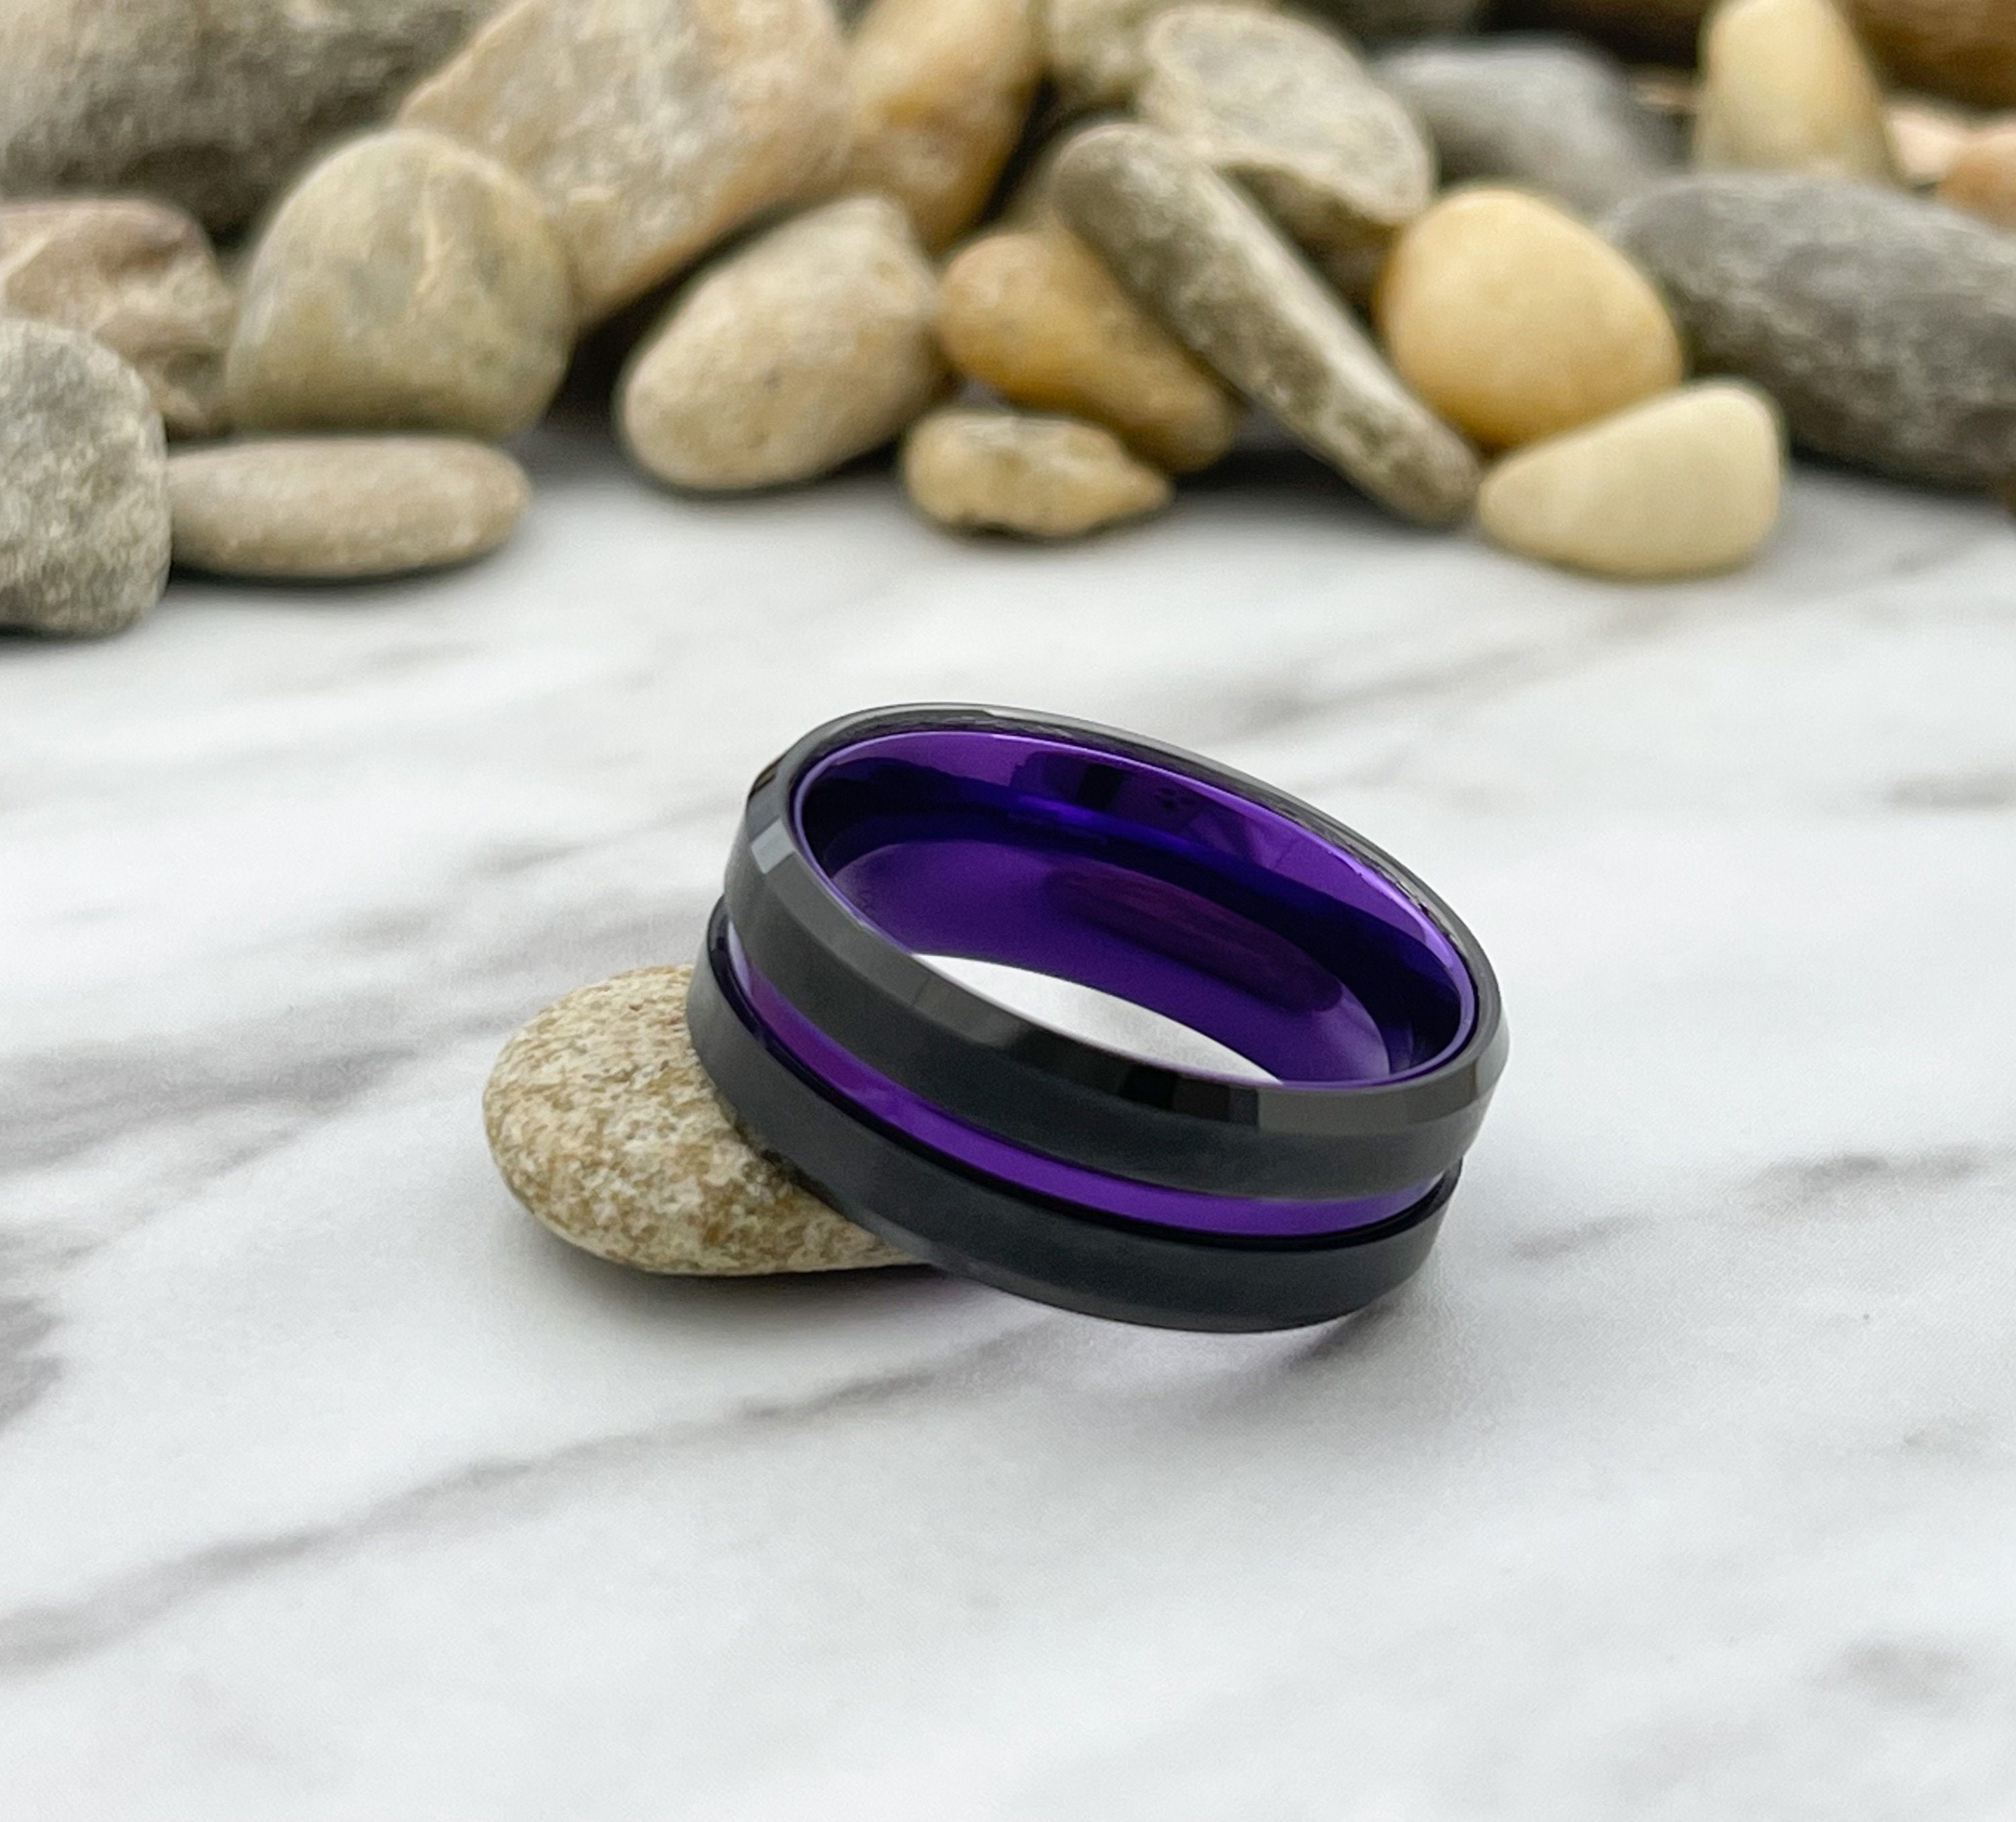 Mens Ring With Purple Stone Shop - www.decision-tree.com 1694456857